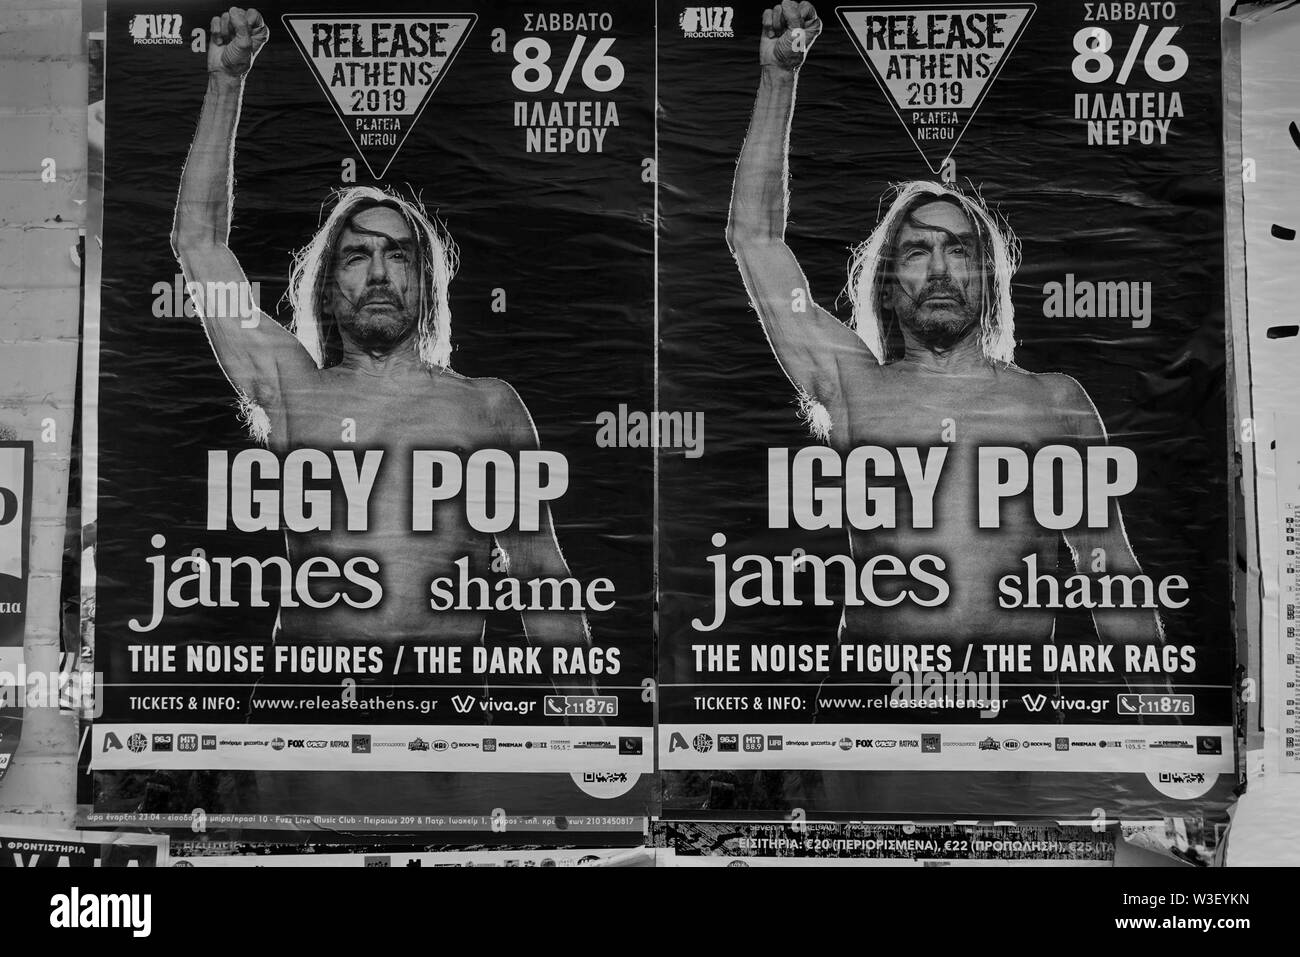 ATHENS, GREECE - MAY 20, 2019: Wall with Iggy Pop rock music concert posters. Black and white. Stock Photo